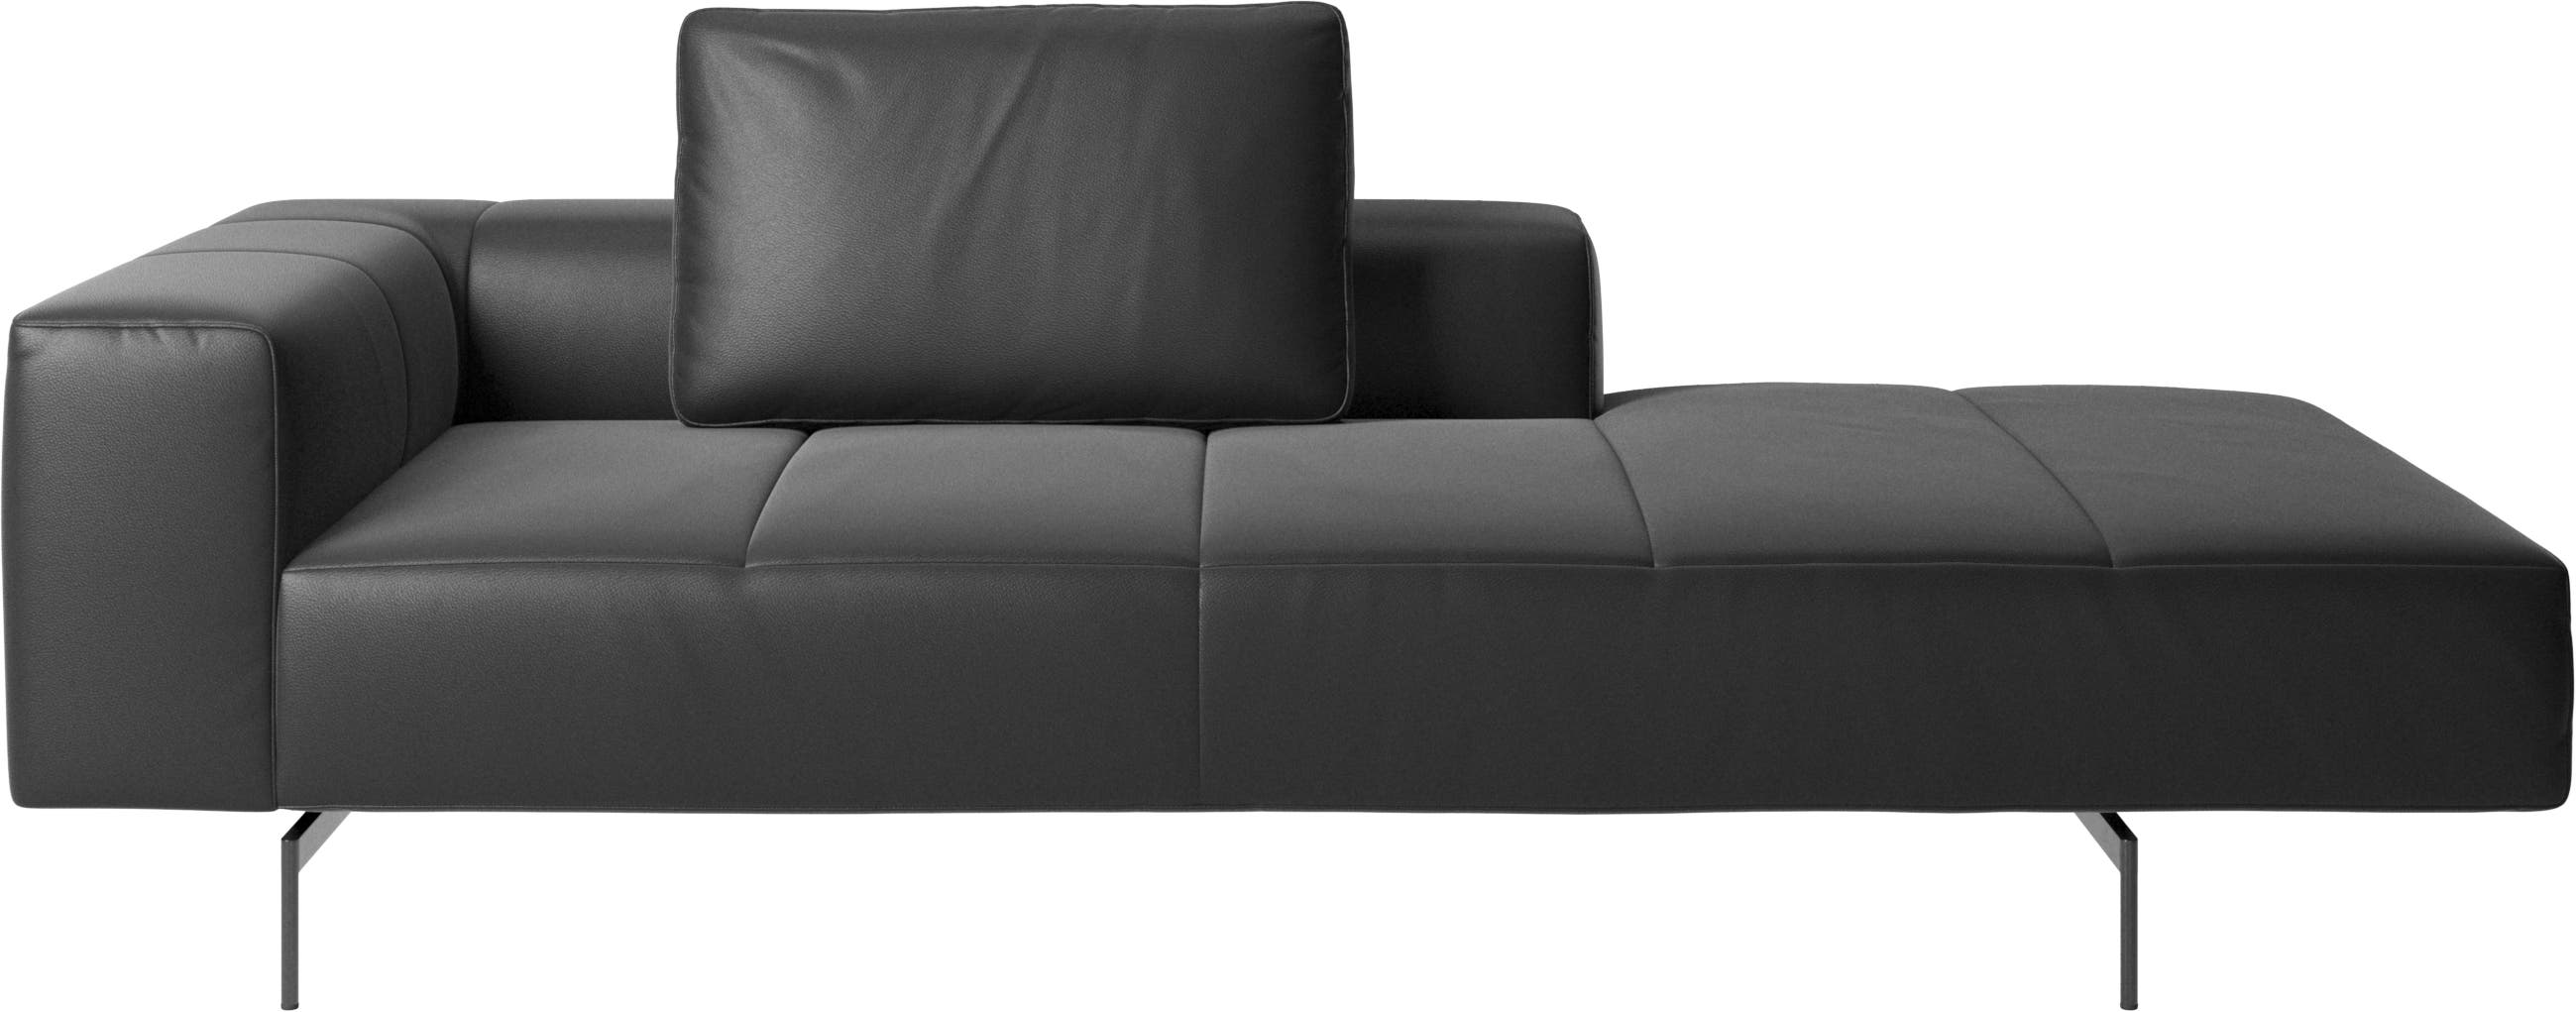 Amsterdam Iounging module for sofa, armrest left, open end right